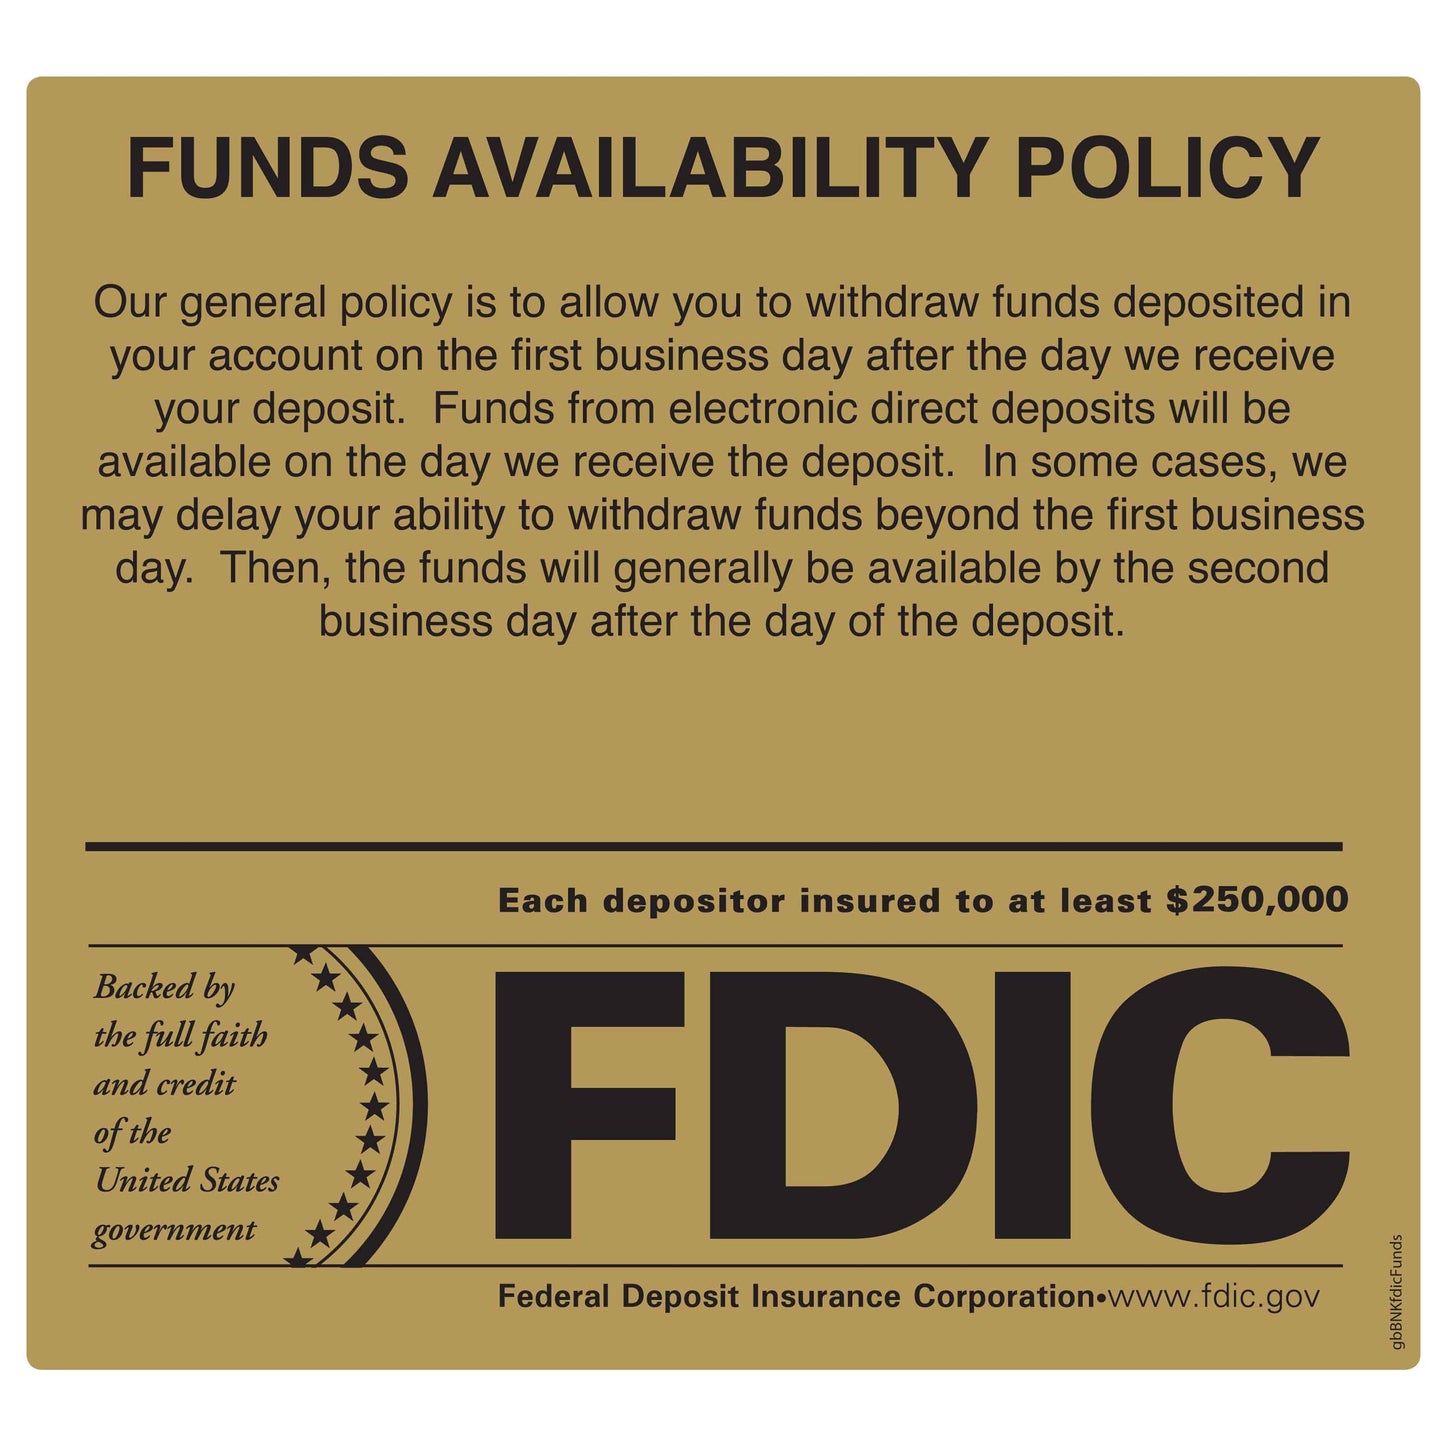 FDIC Gold and Black Funds Availability Policy Decal - 7 inches by 6.5 inches in size. 